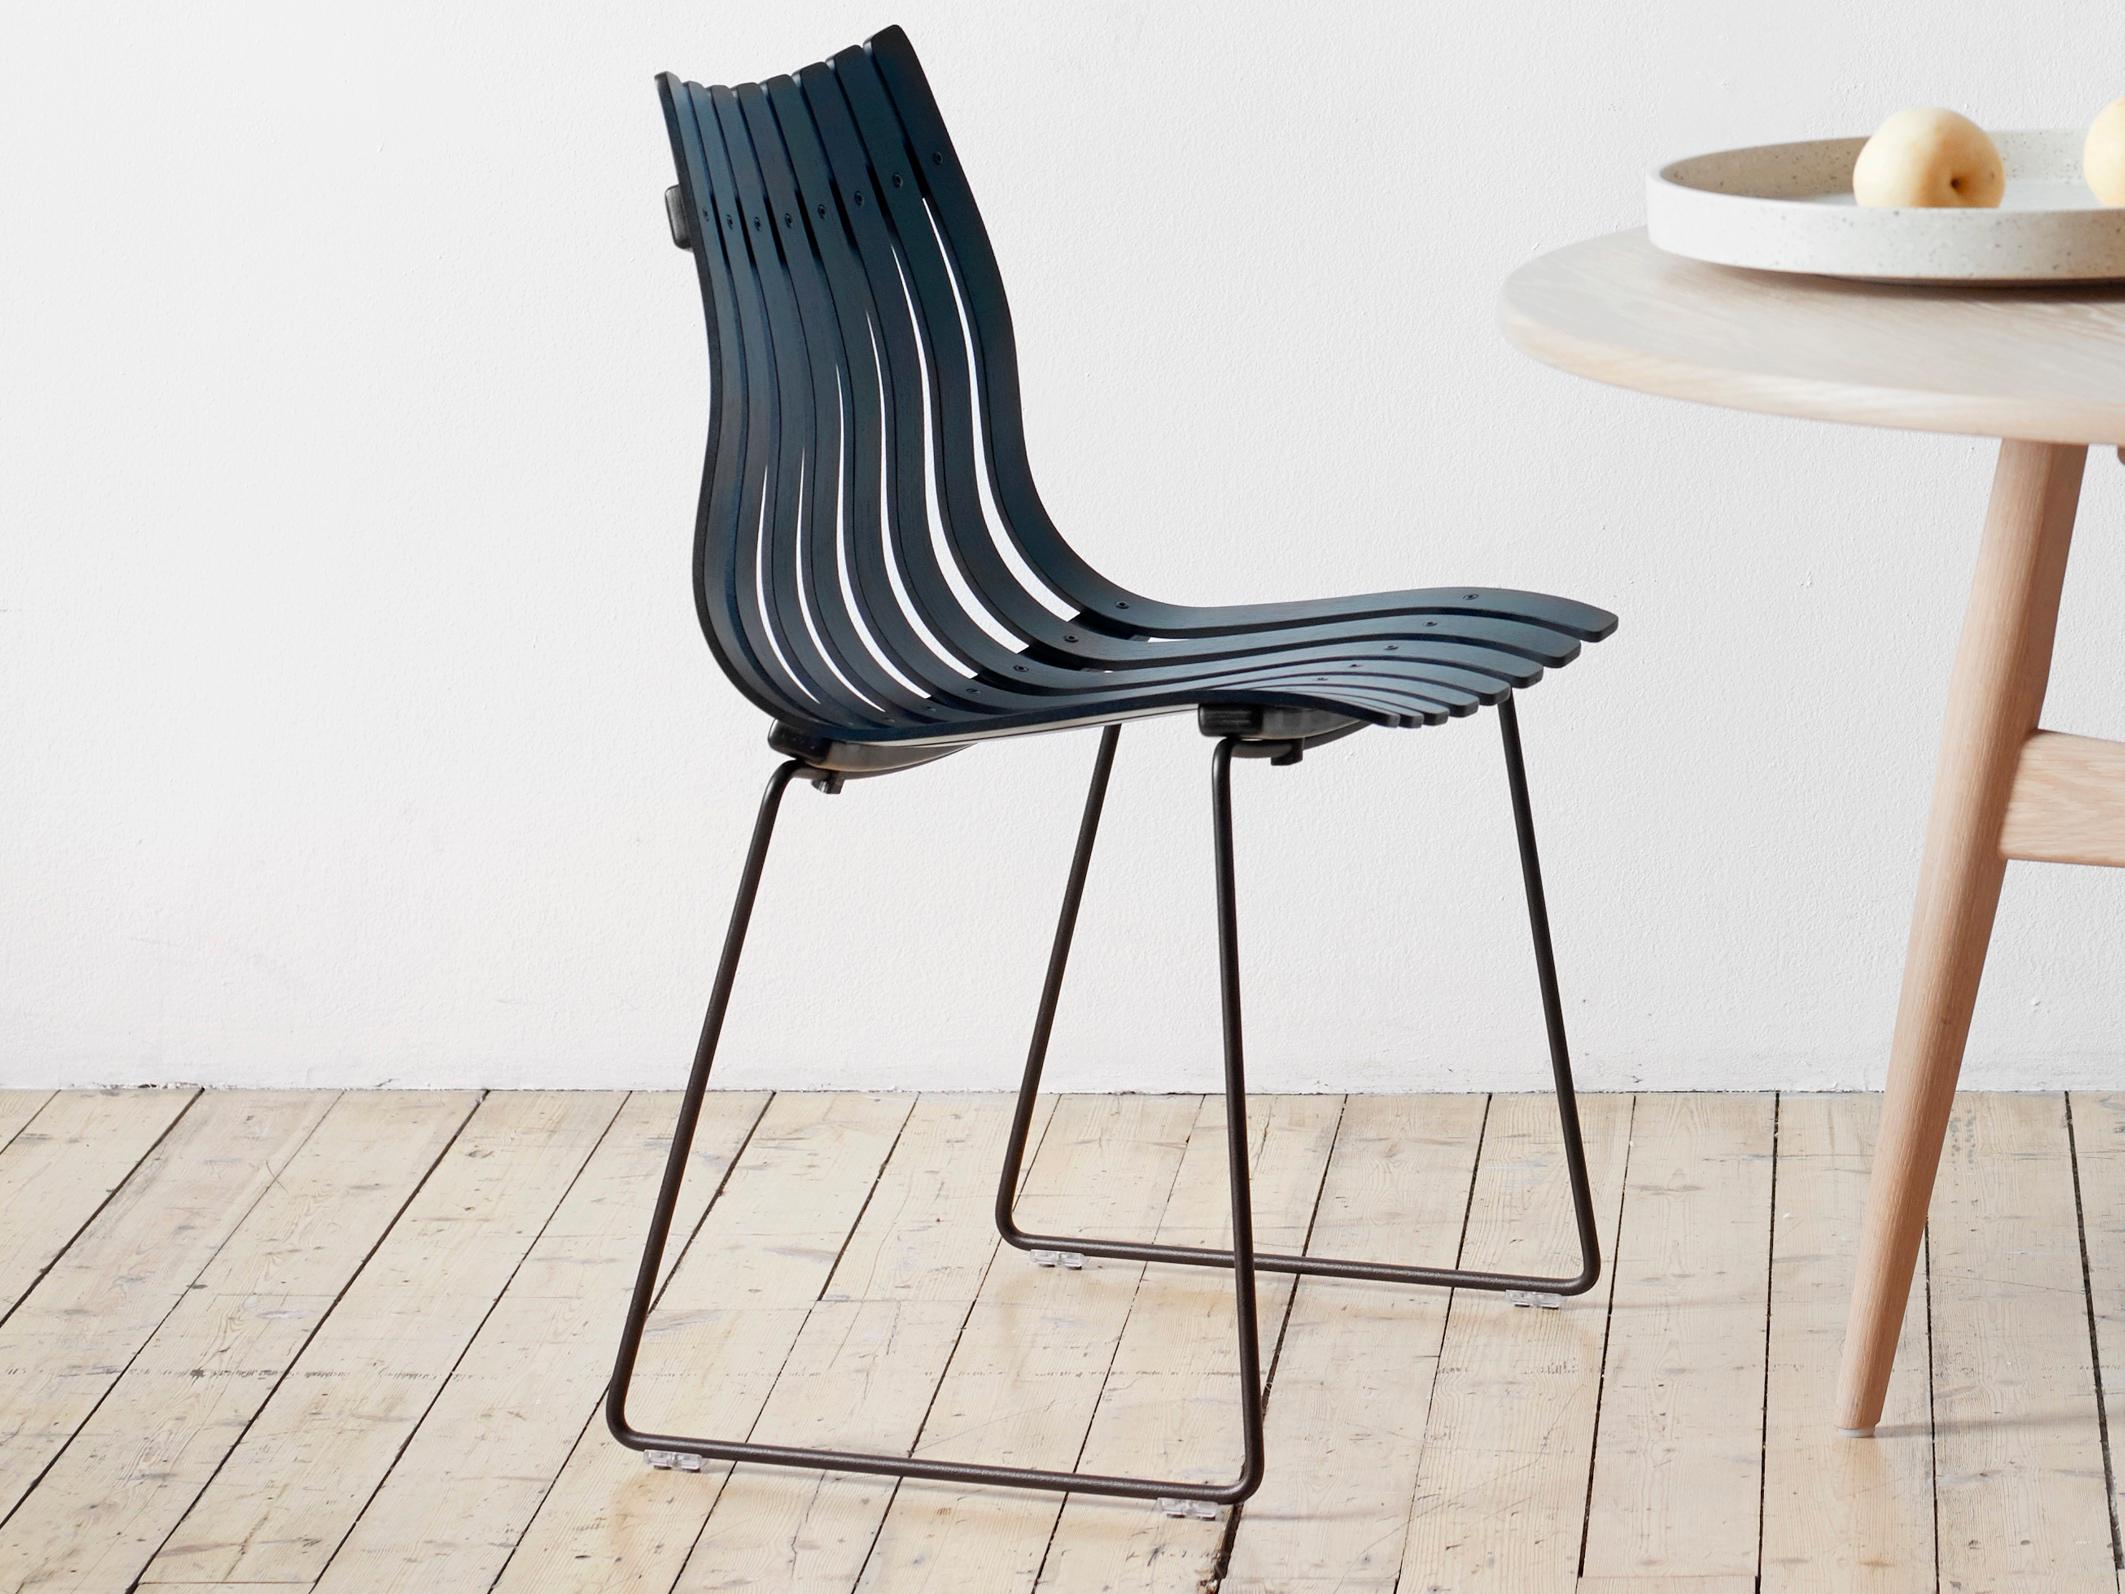 Scandia Junior chair. New edition. Created in 1957 by designer Hans Brattrud, Scandia junior is an iconic chair of Scandinavian design with its shell in glued laminated arched and veneered. The Scandia junior chair is stackable available in 3 wood